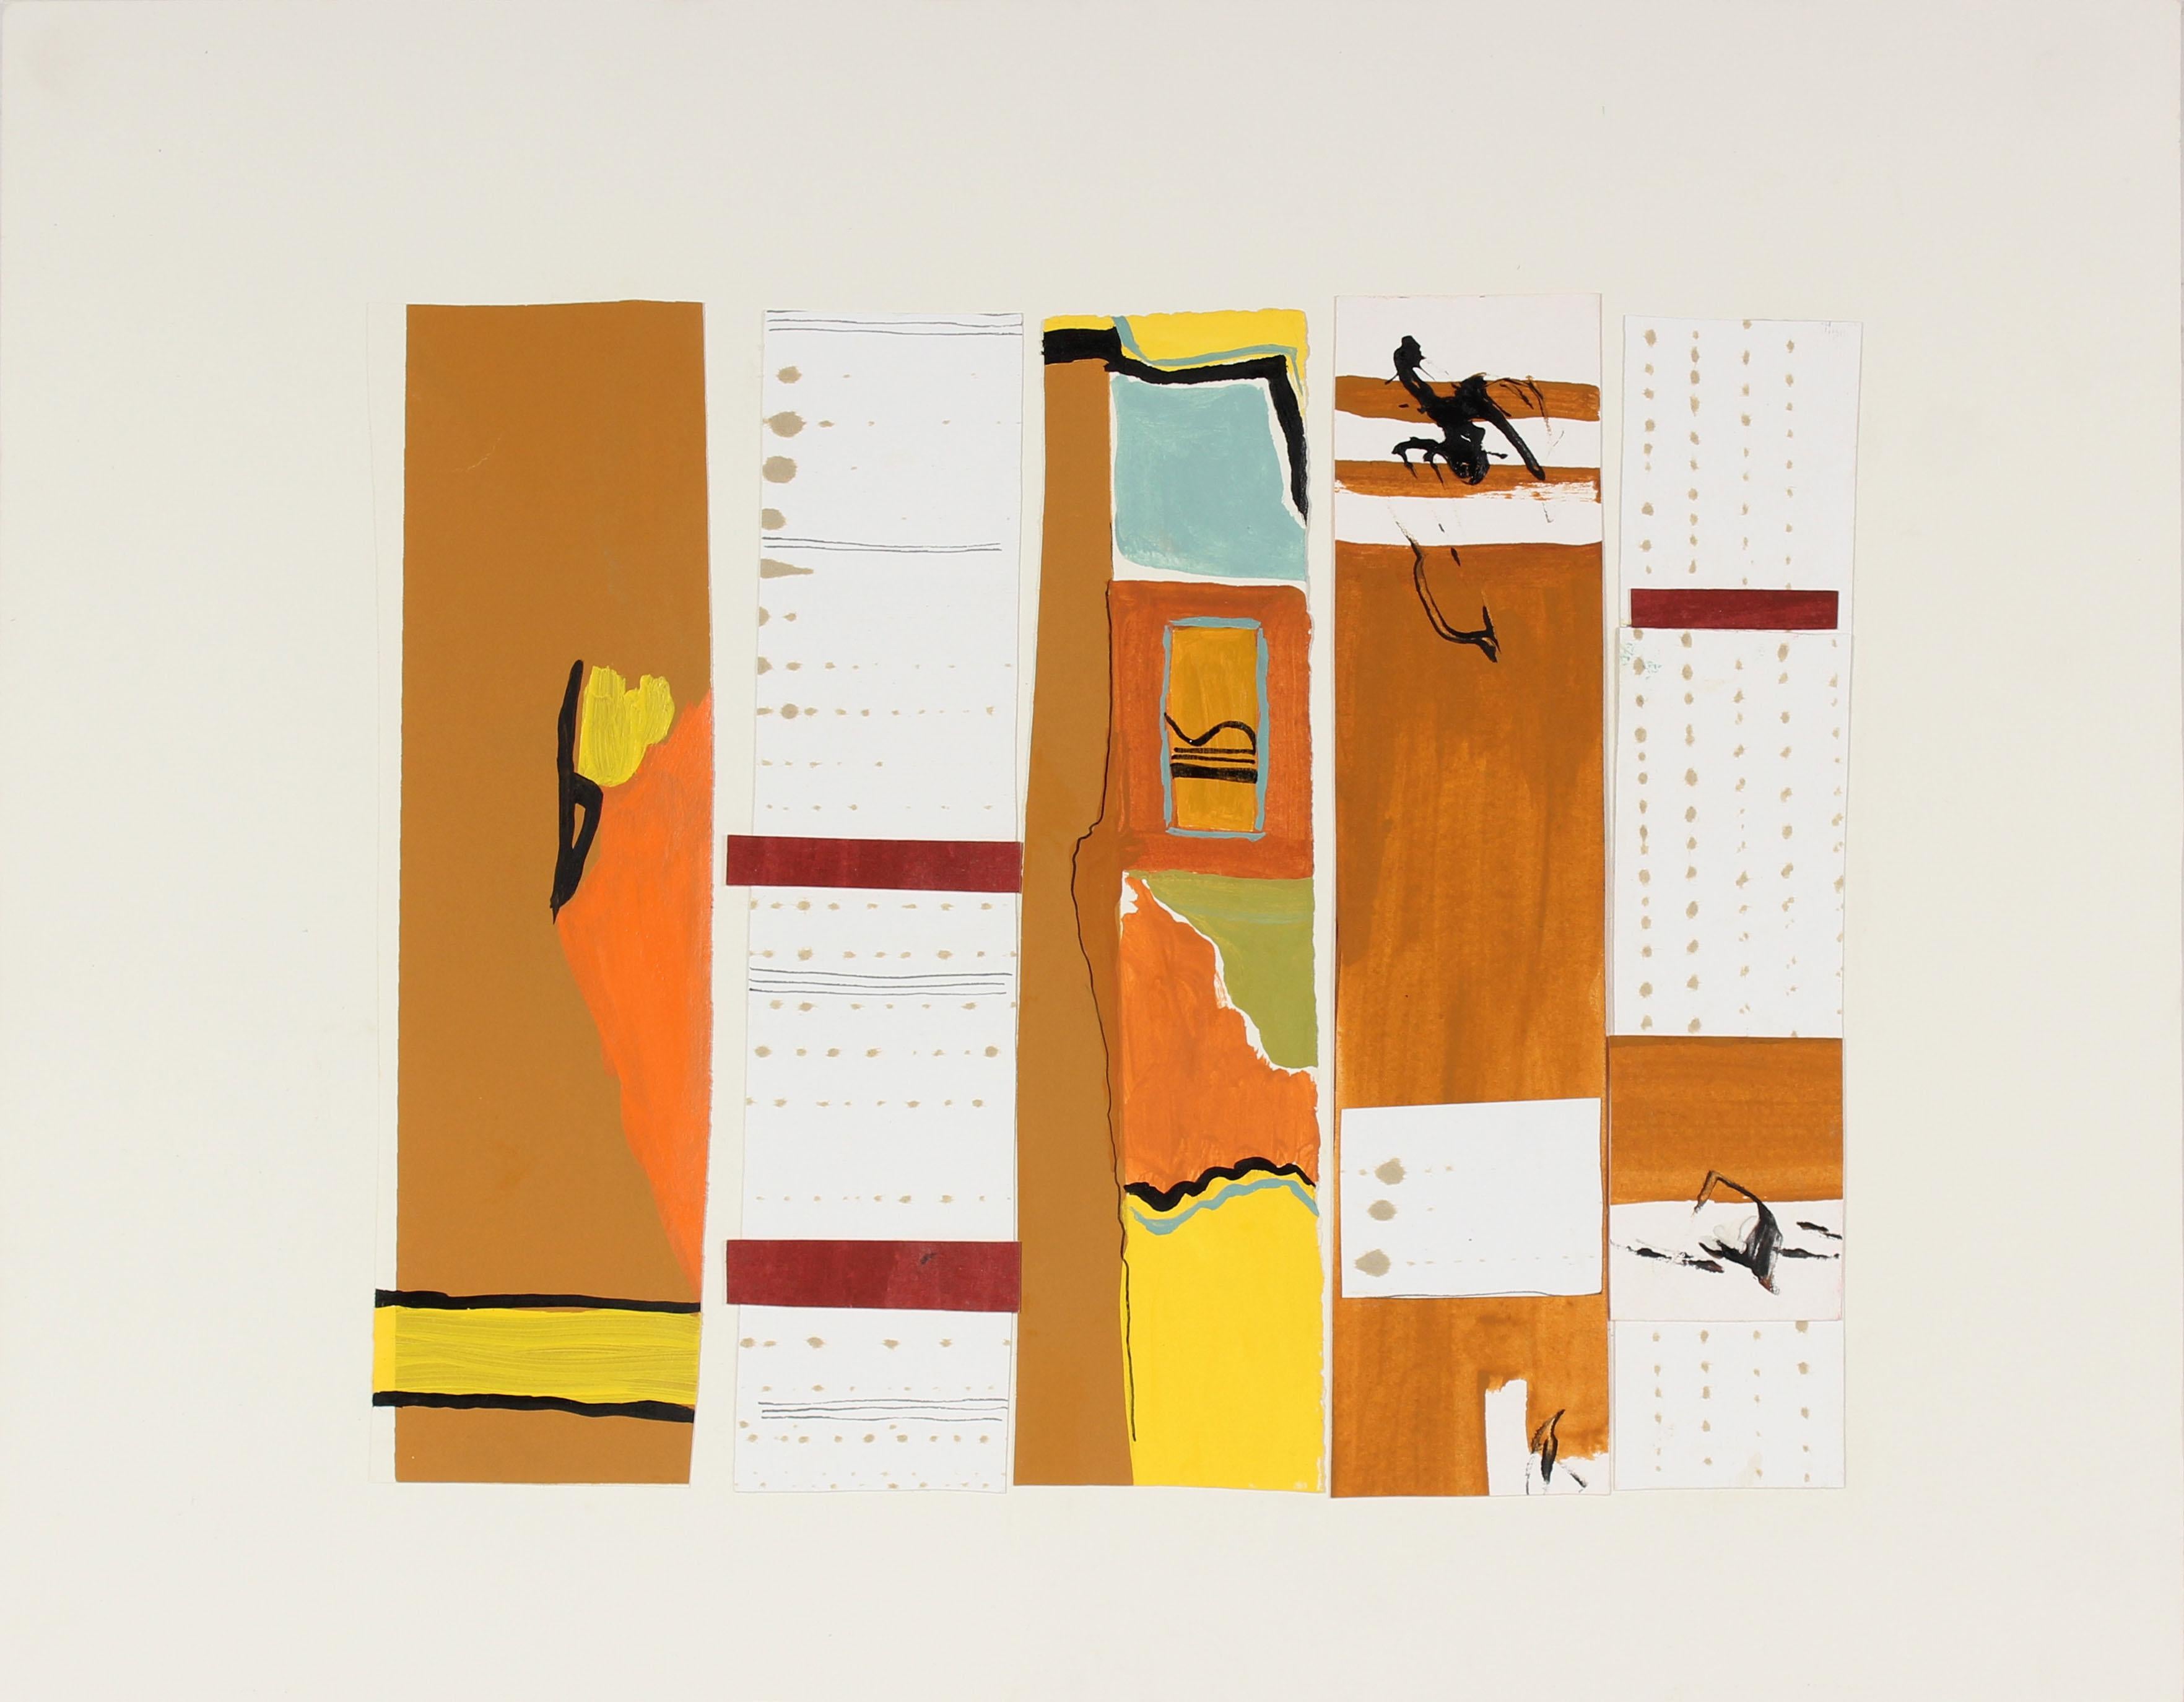 Gwen Stone Abstract Print - "5 Notions with Sienna" Multi-Media Collage on Paper